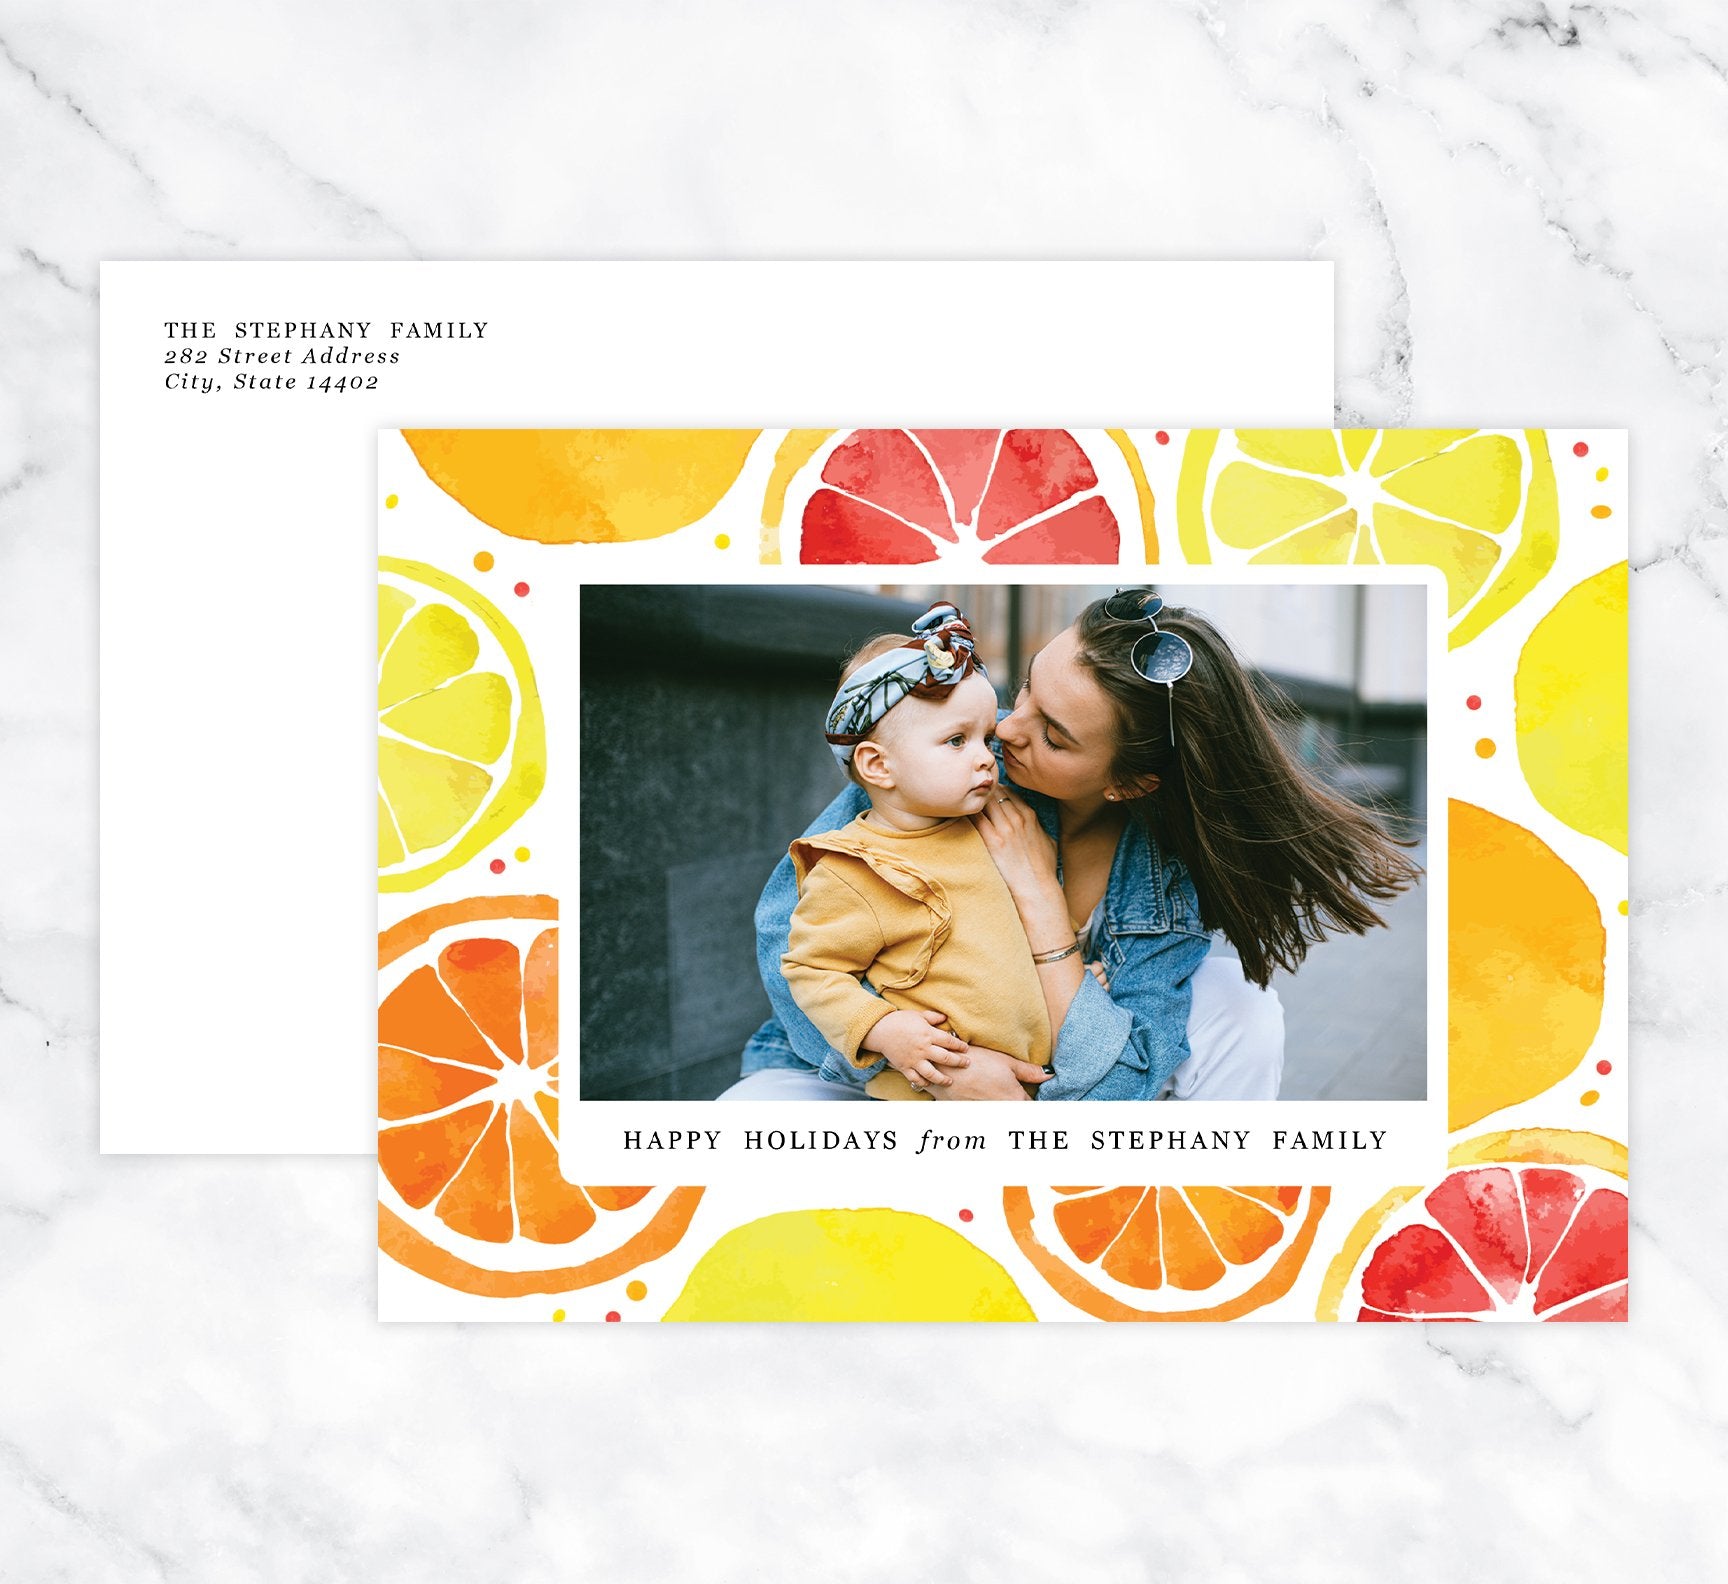 Lemony Sweet Holiday Card Mockup; Holiday card with envelope and return address printed on it. 